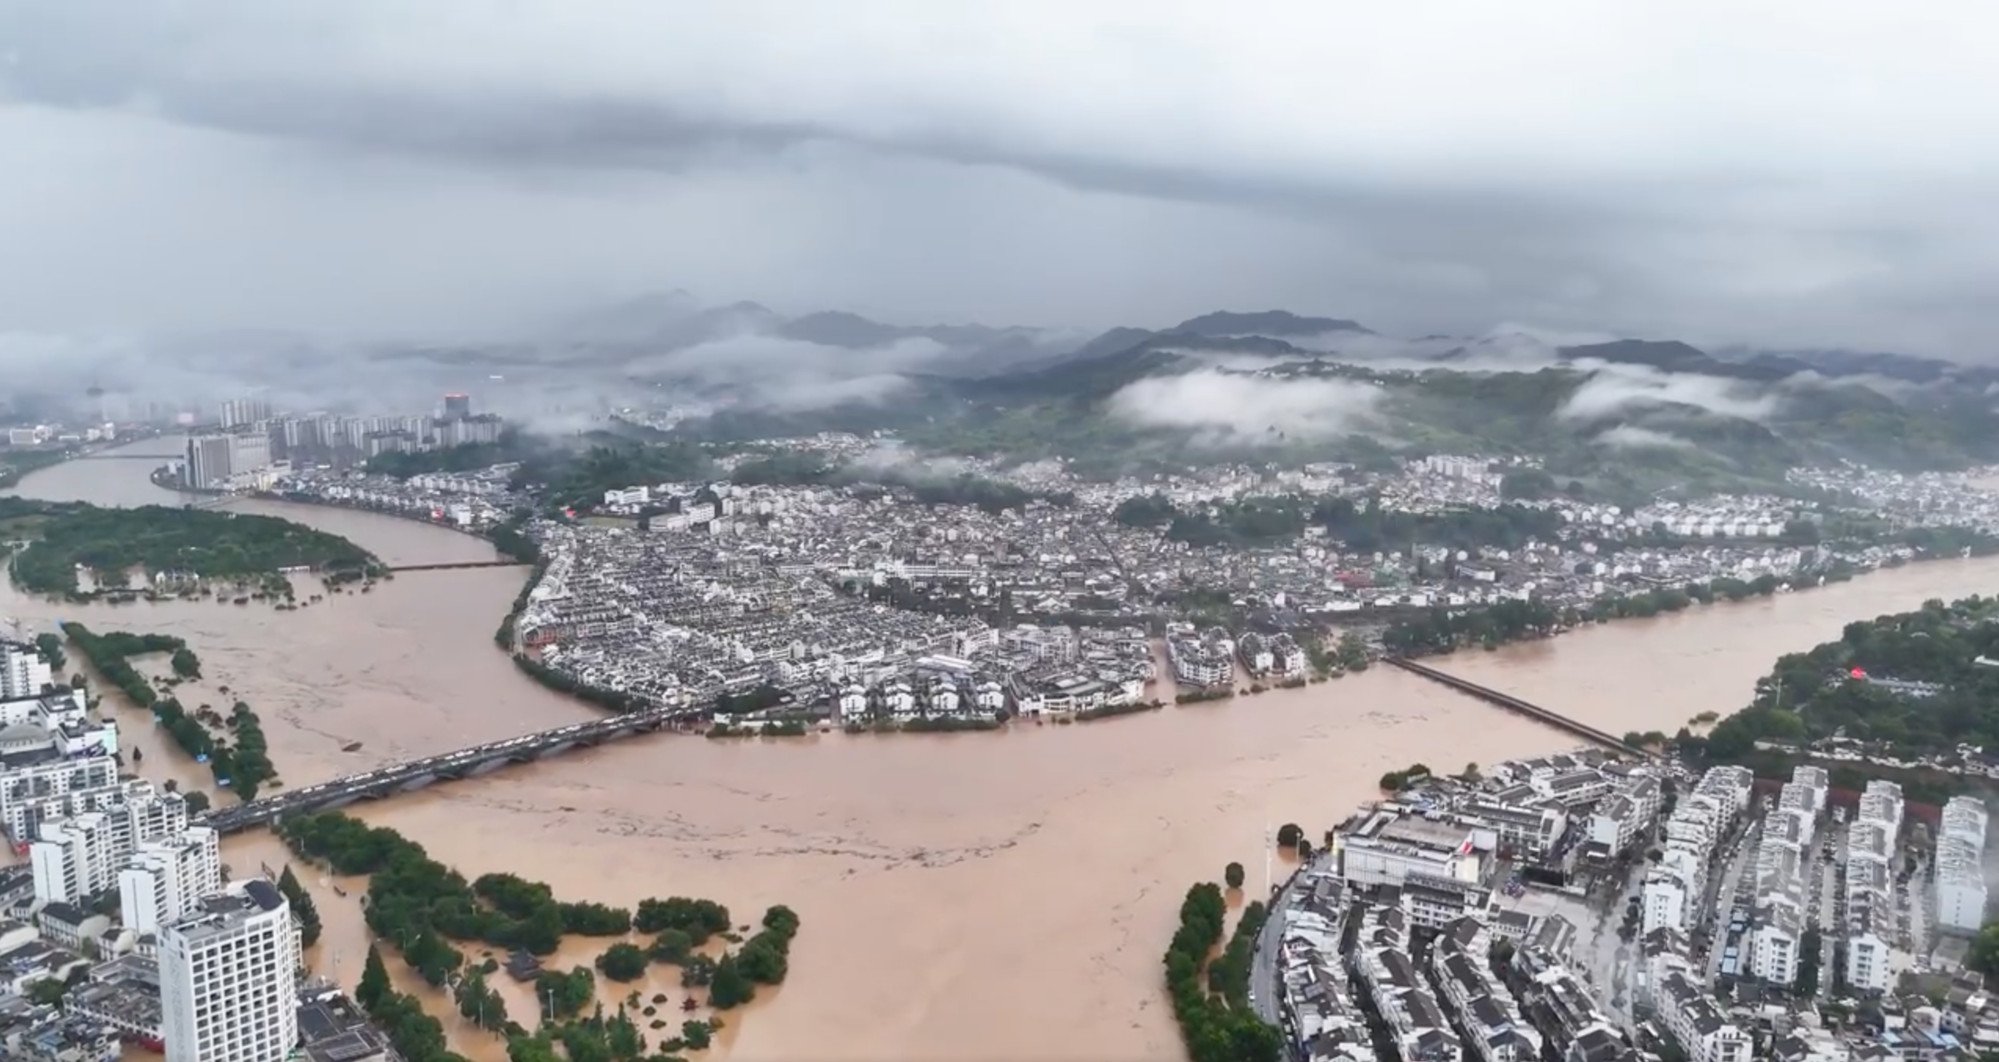 An aerial view of the swollen river in Huangshan, in eastern China’s Anhui province on Thursday. Photo: Weibo